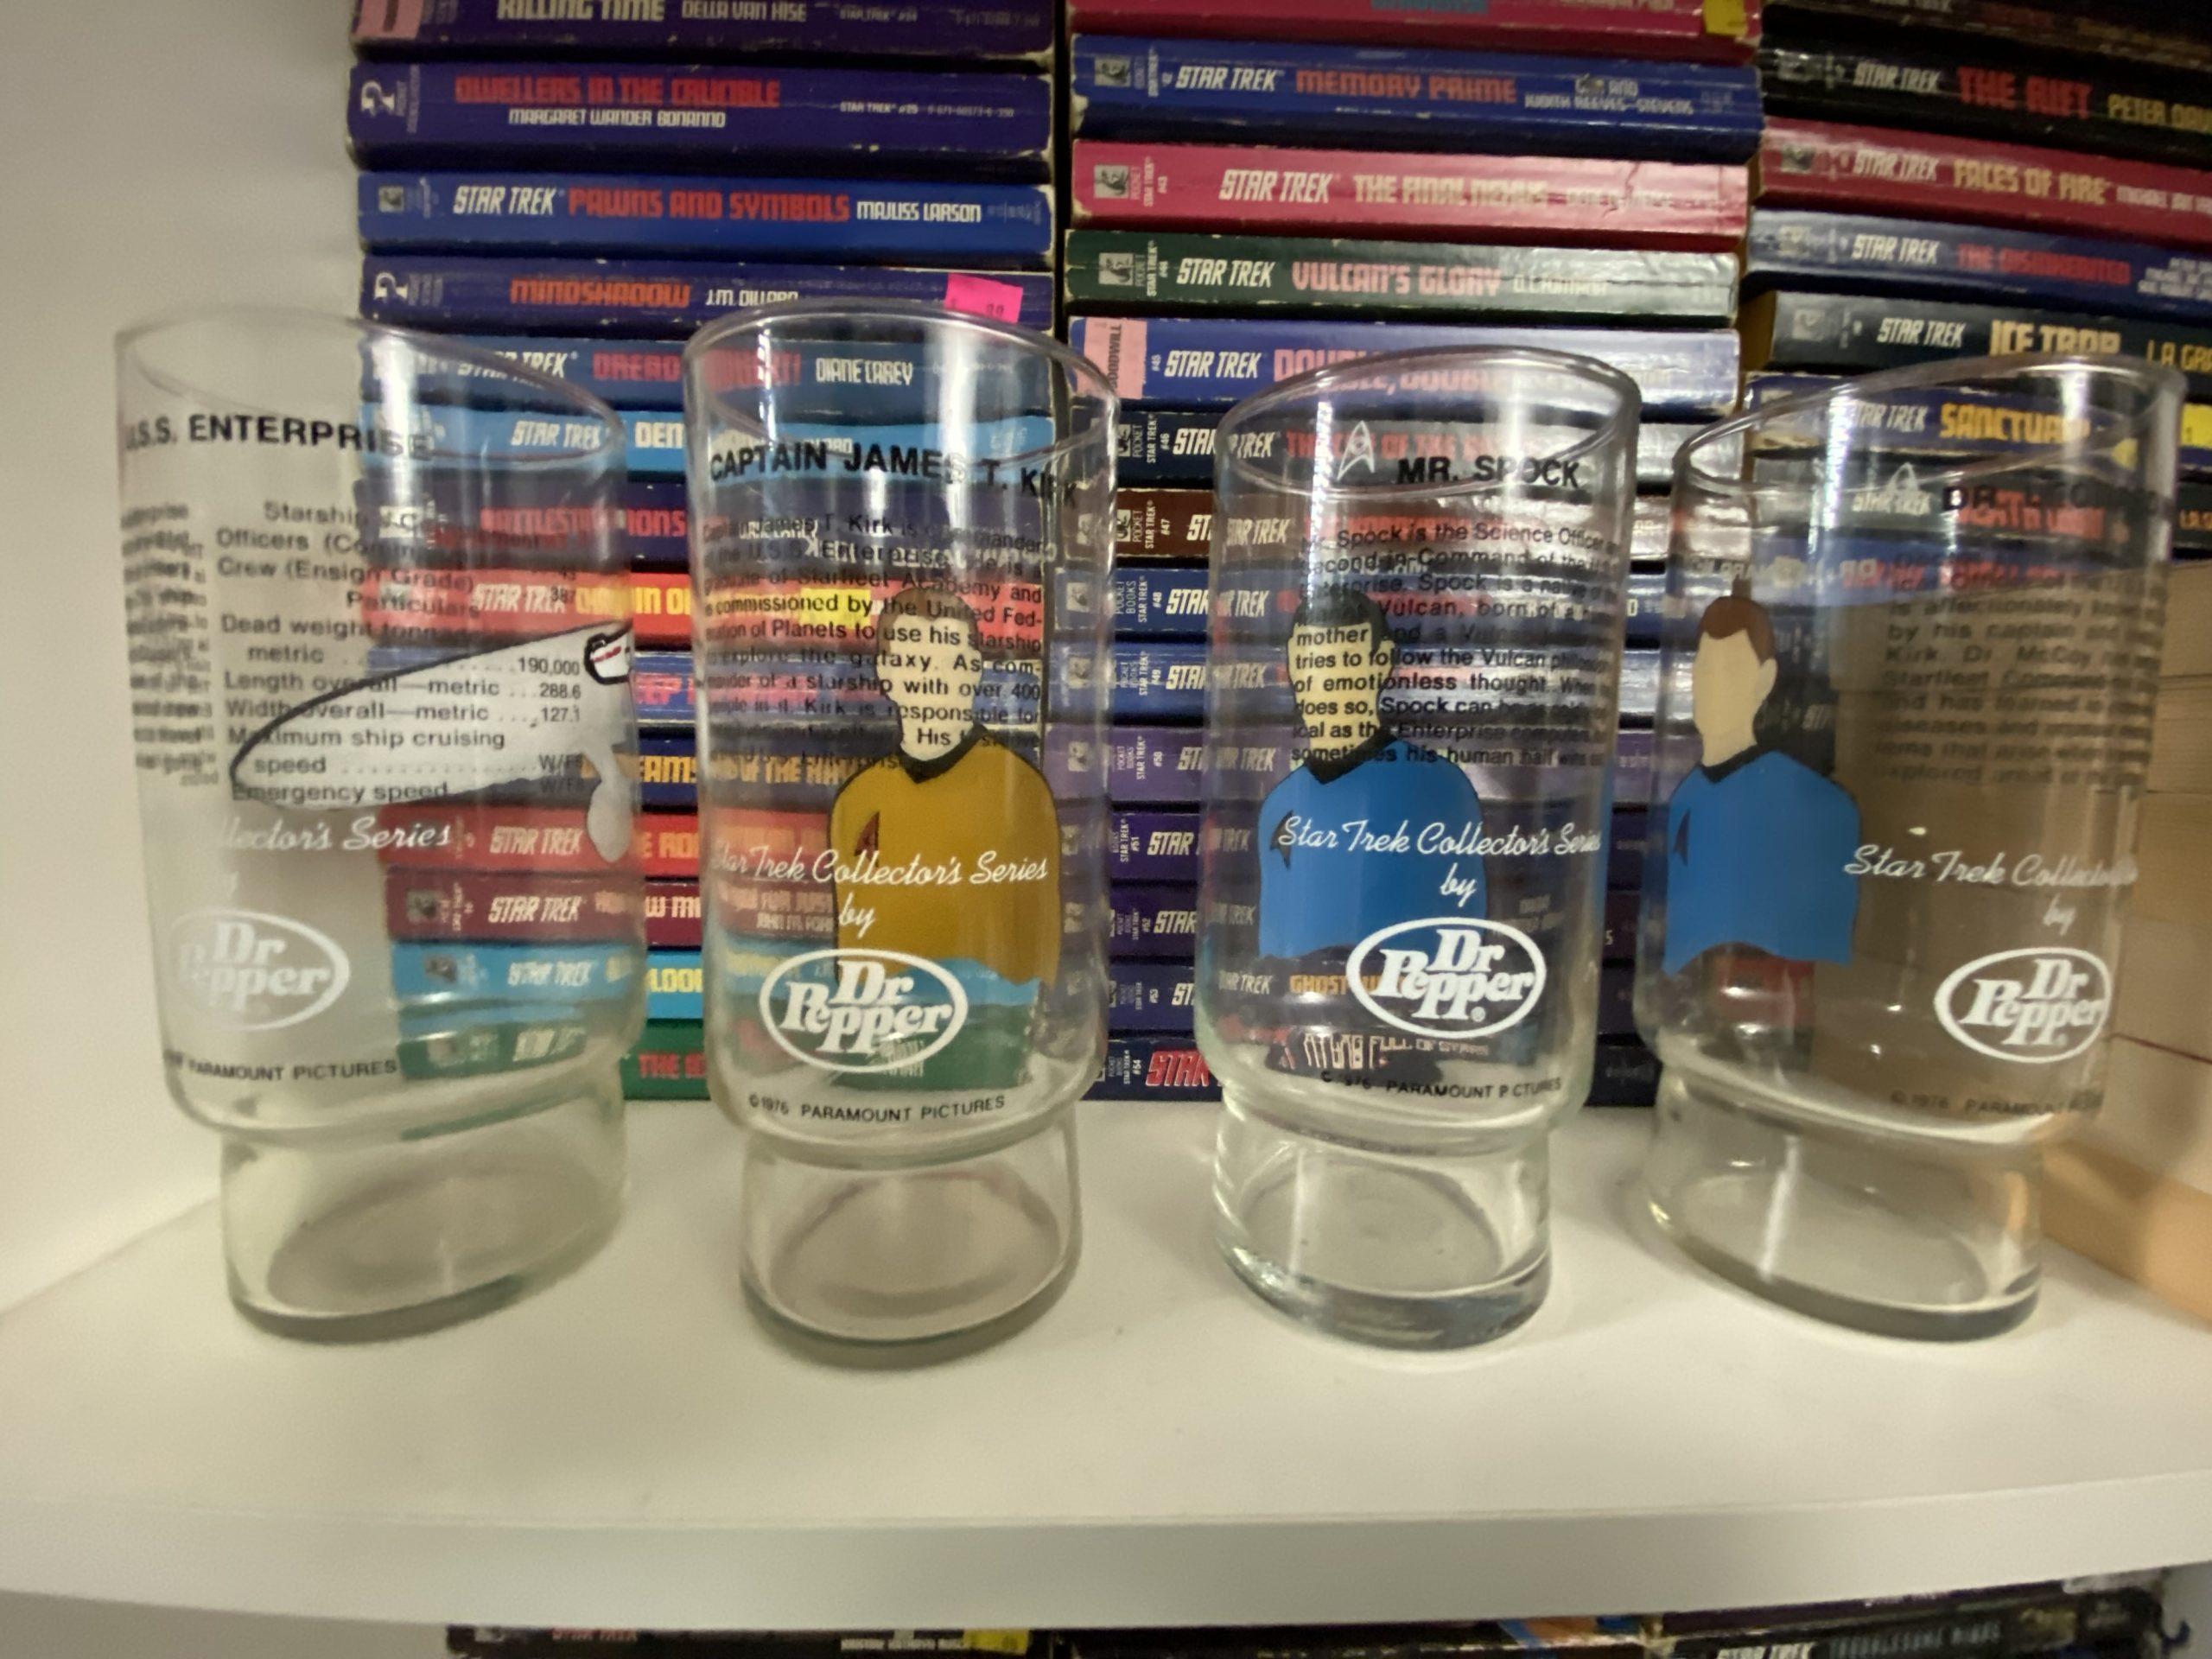 Four drinking glases sitting on a bookshelf in front of a stack of TOS Star Trek novels. They are turned to show the text on the back of each glass, though it's difficult to read in this photo.